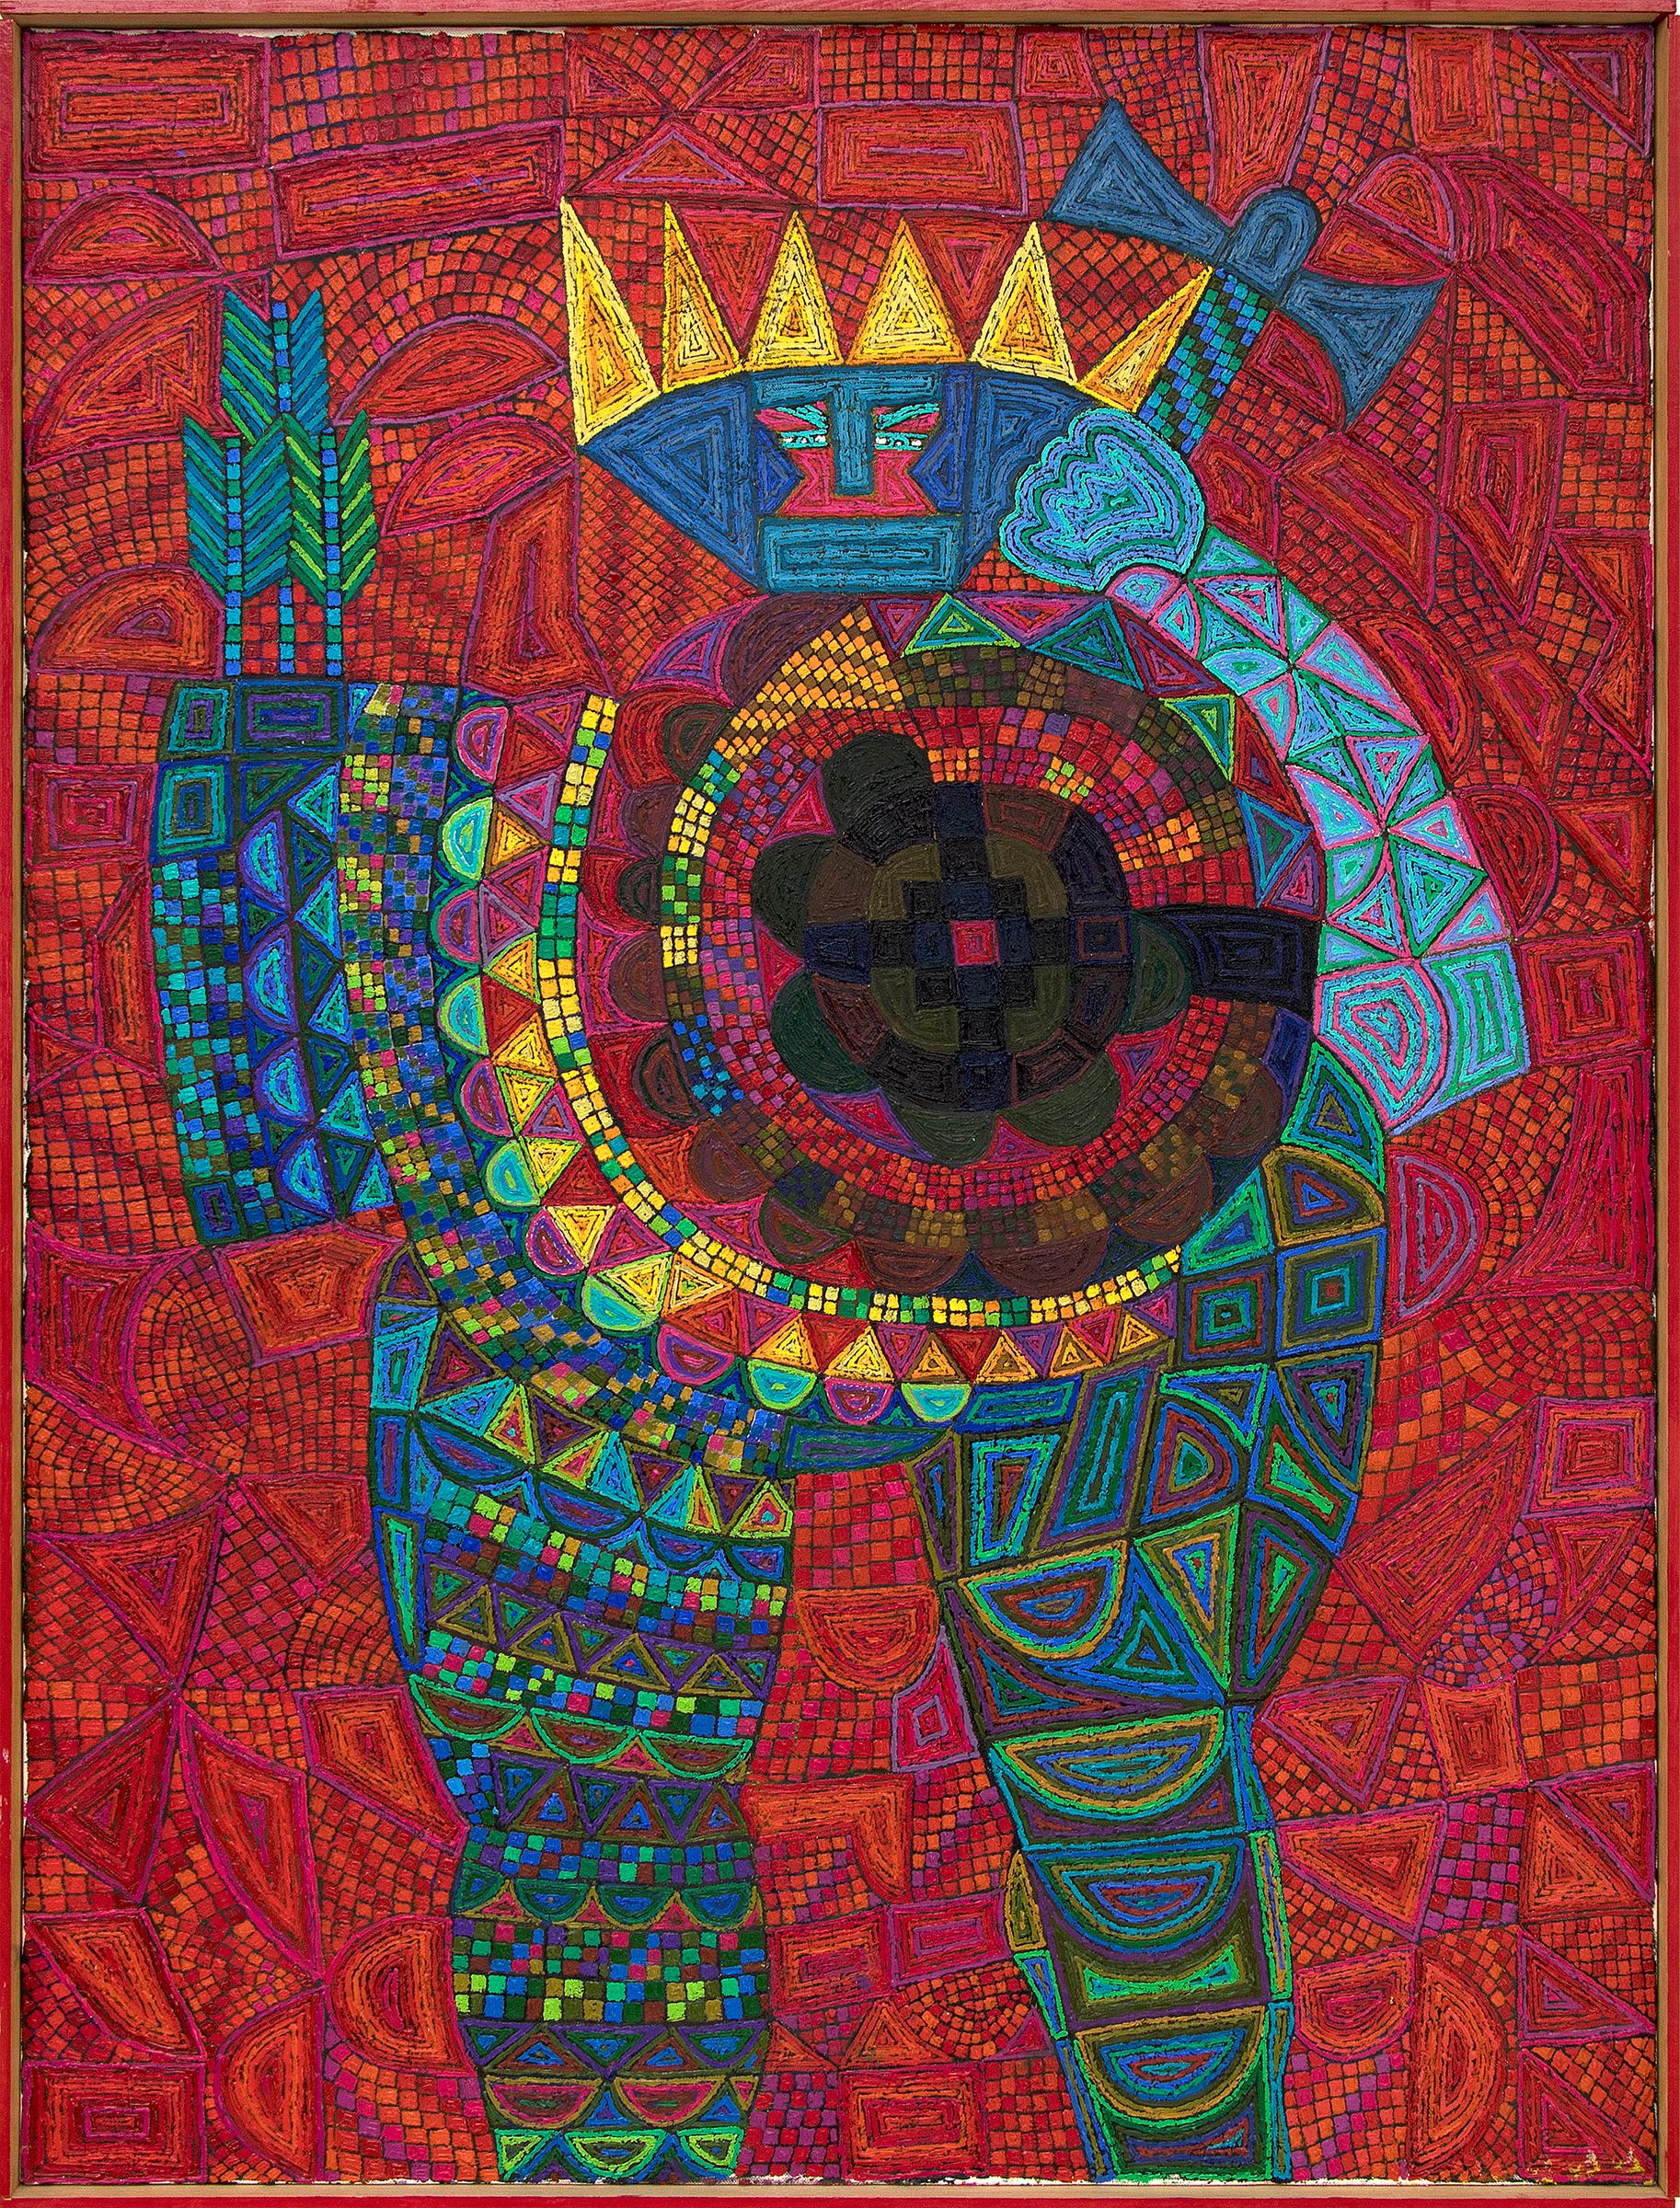 Edward Marecak Abstract Painting - The Warlord, 1990s Framed Abstract Figural Painting, Red Blue Green